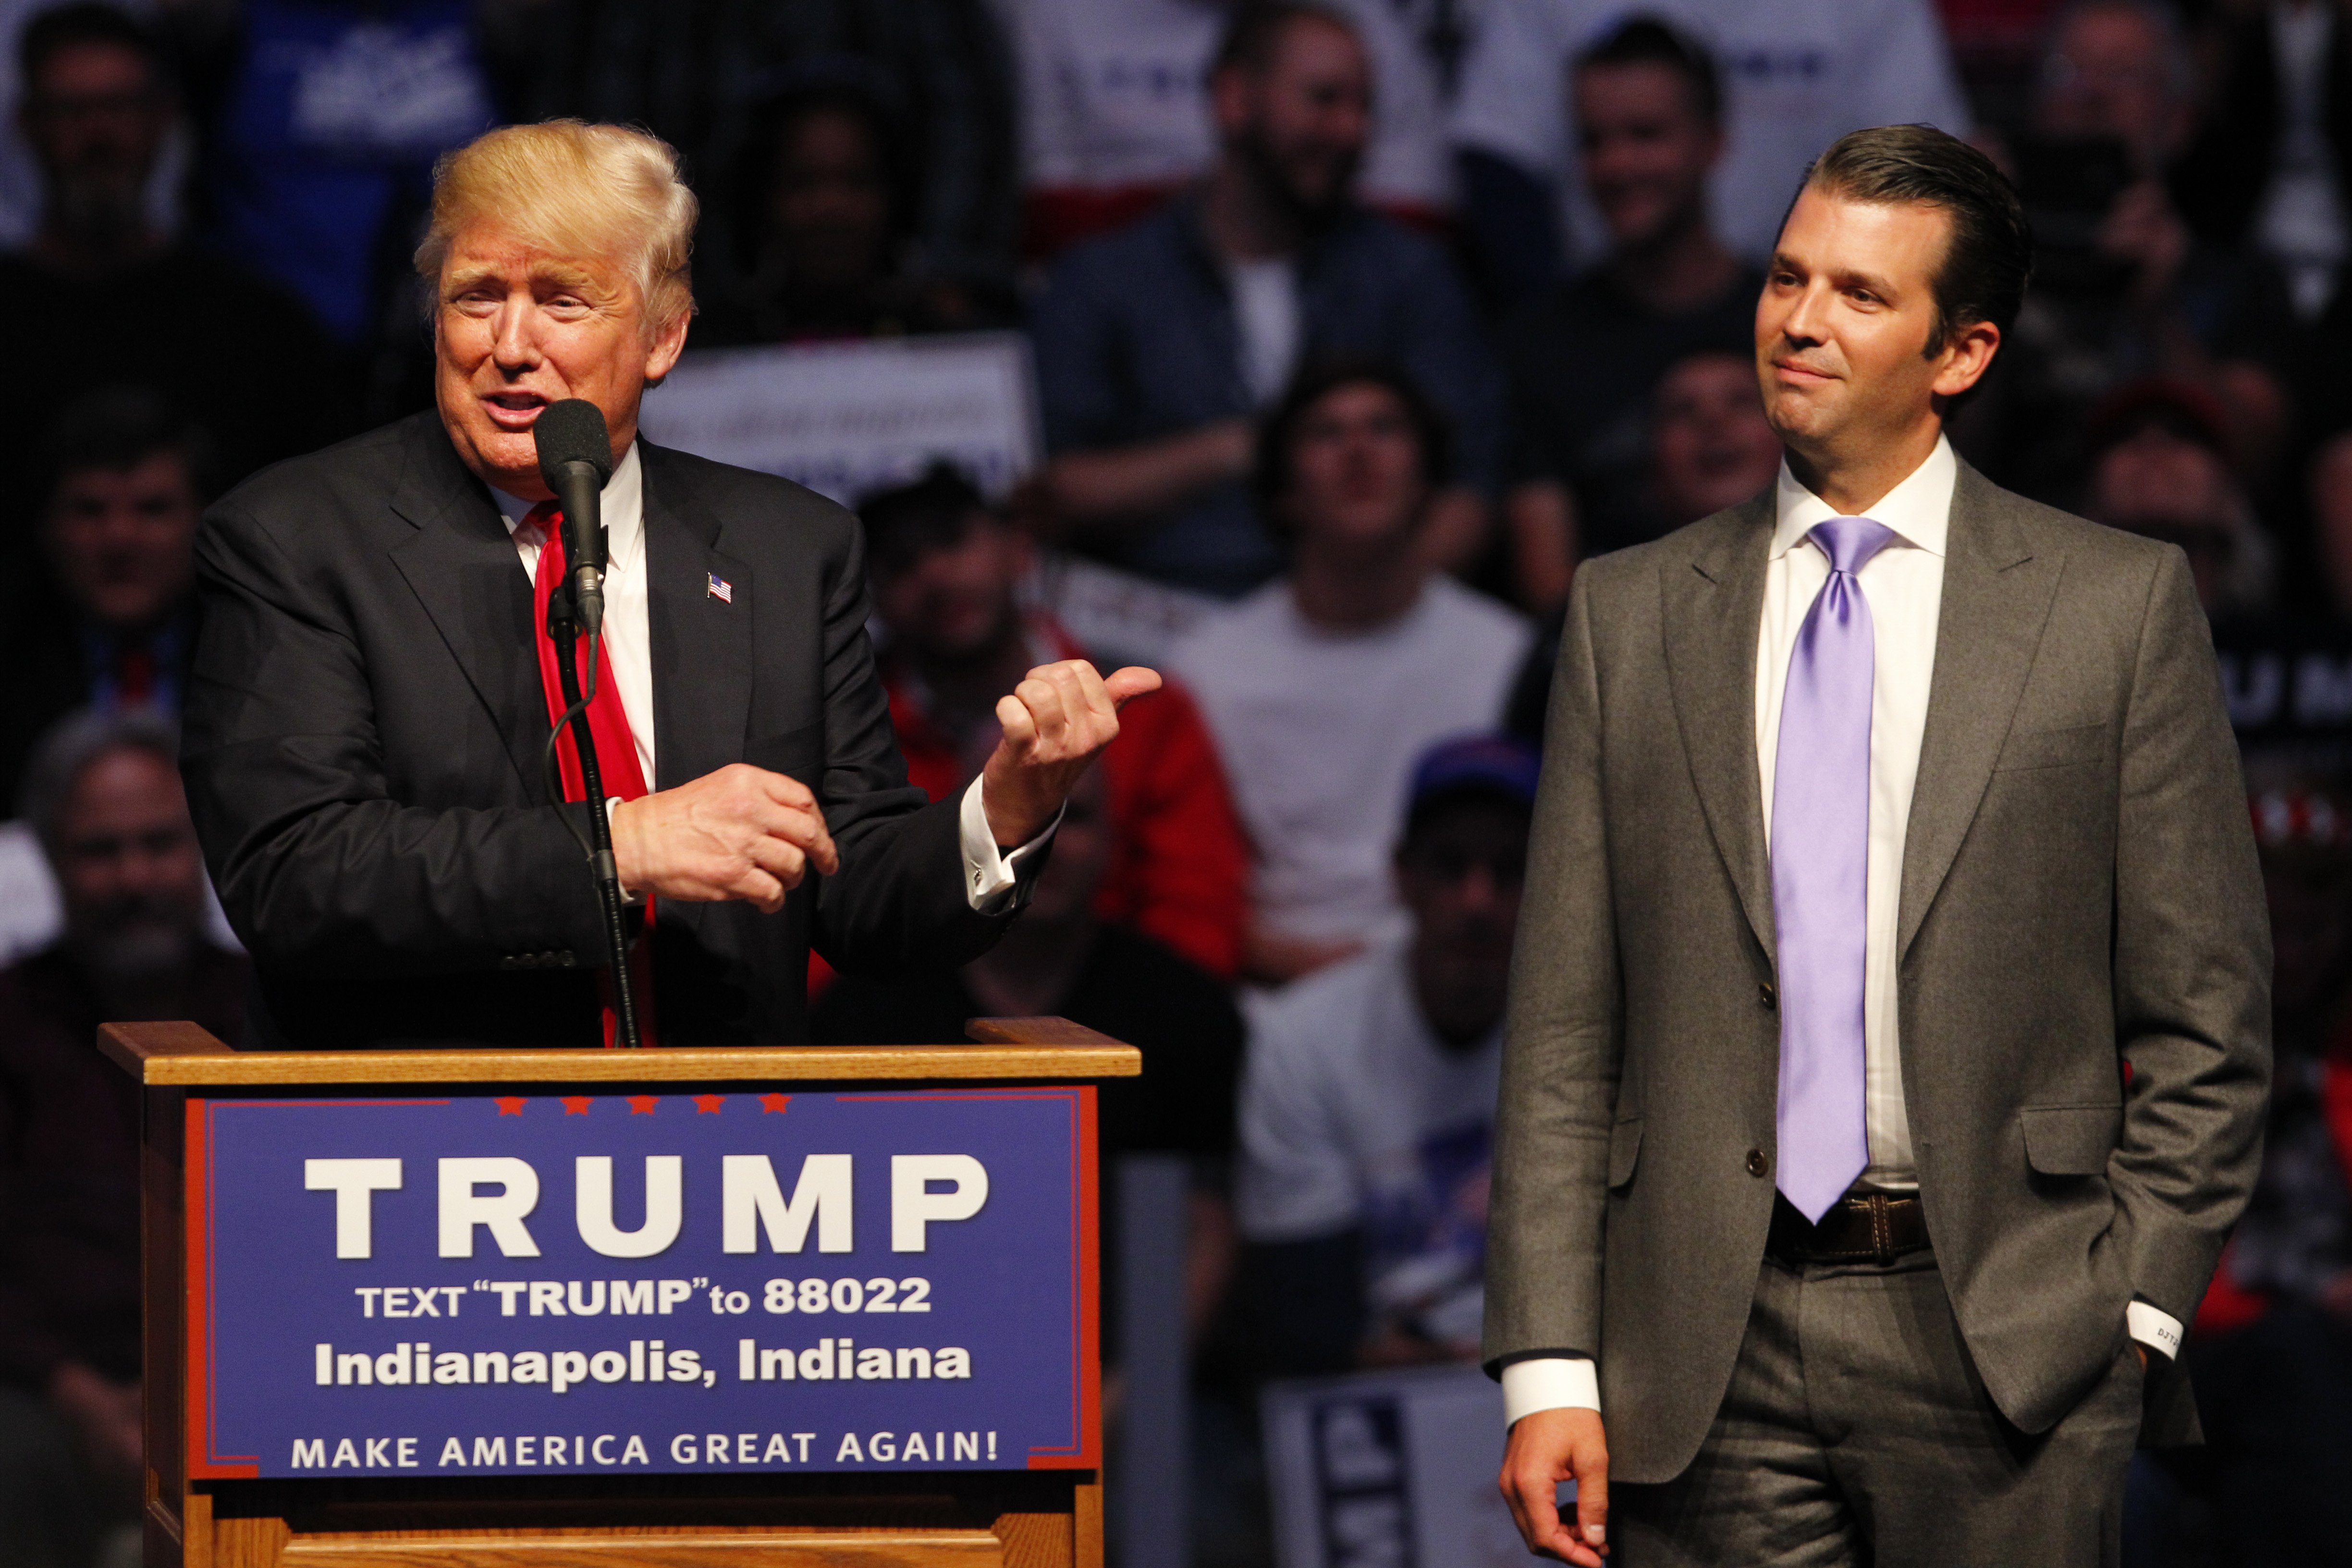 President Trump and his son, Donald Trump Jr, in Indianapolis, Indiana. Image credit: Getty/GlobalImagesUkraine